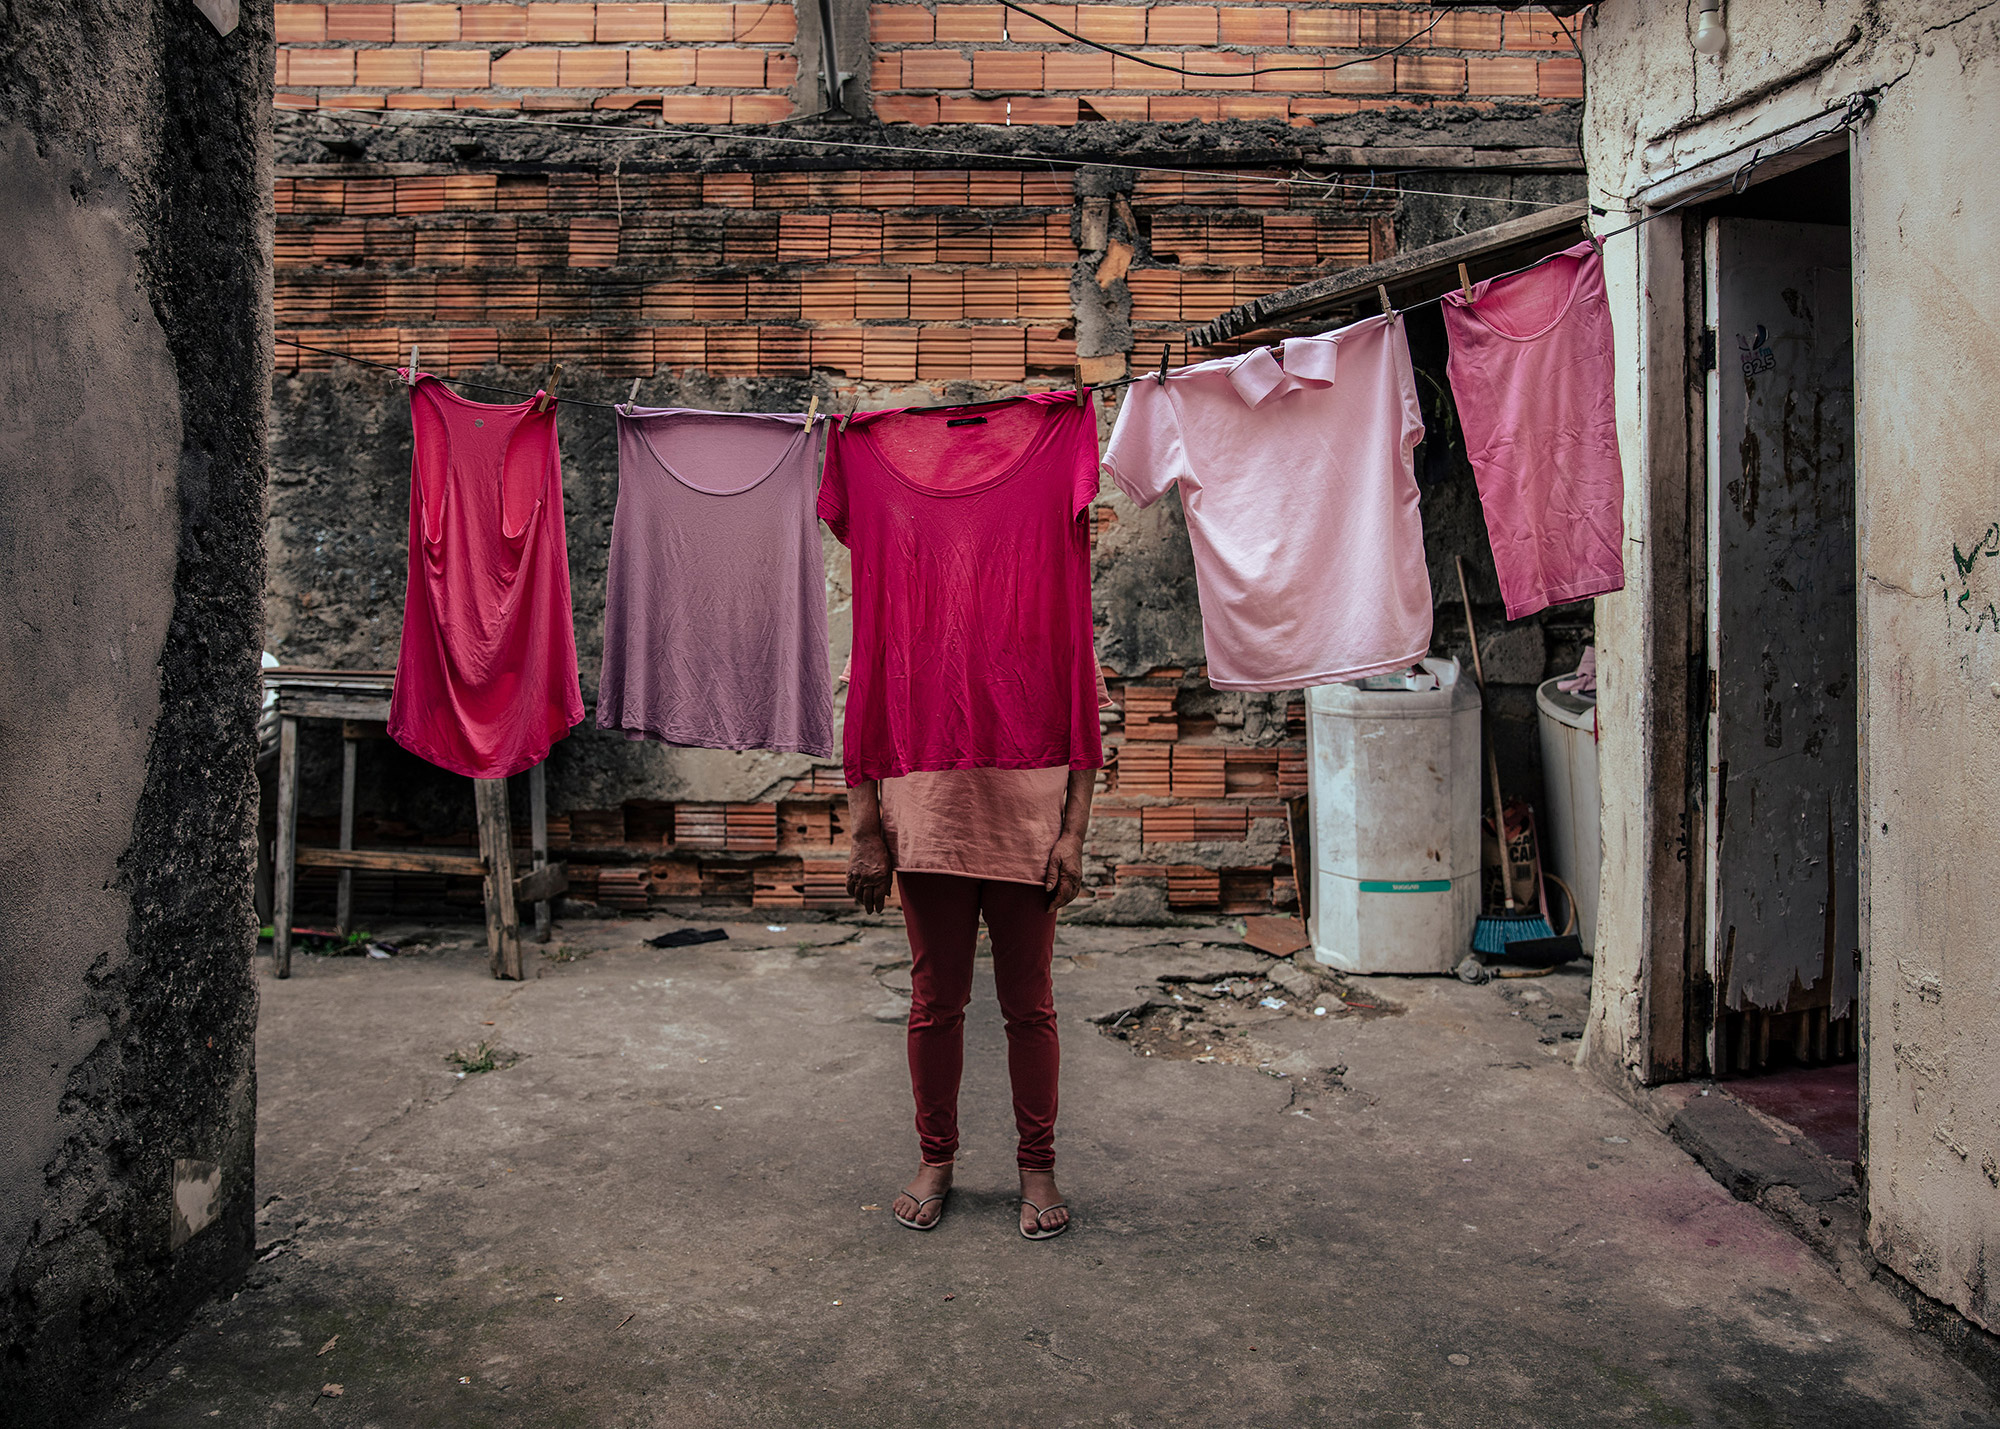 Isabel hanging her family women's pink t-shirts used to visit the imprisoned sons.